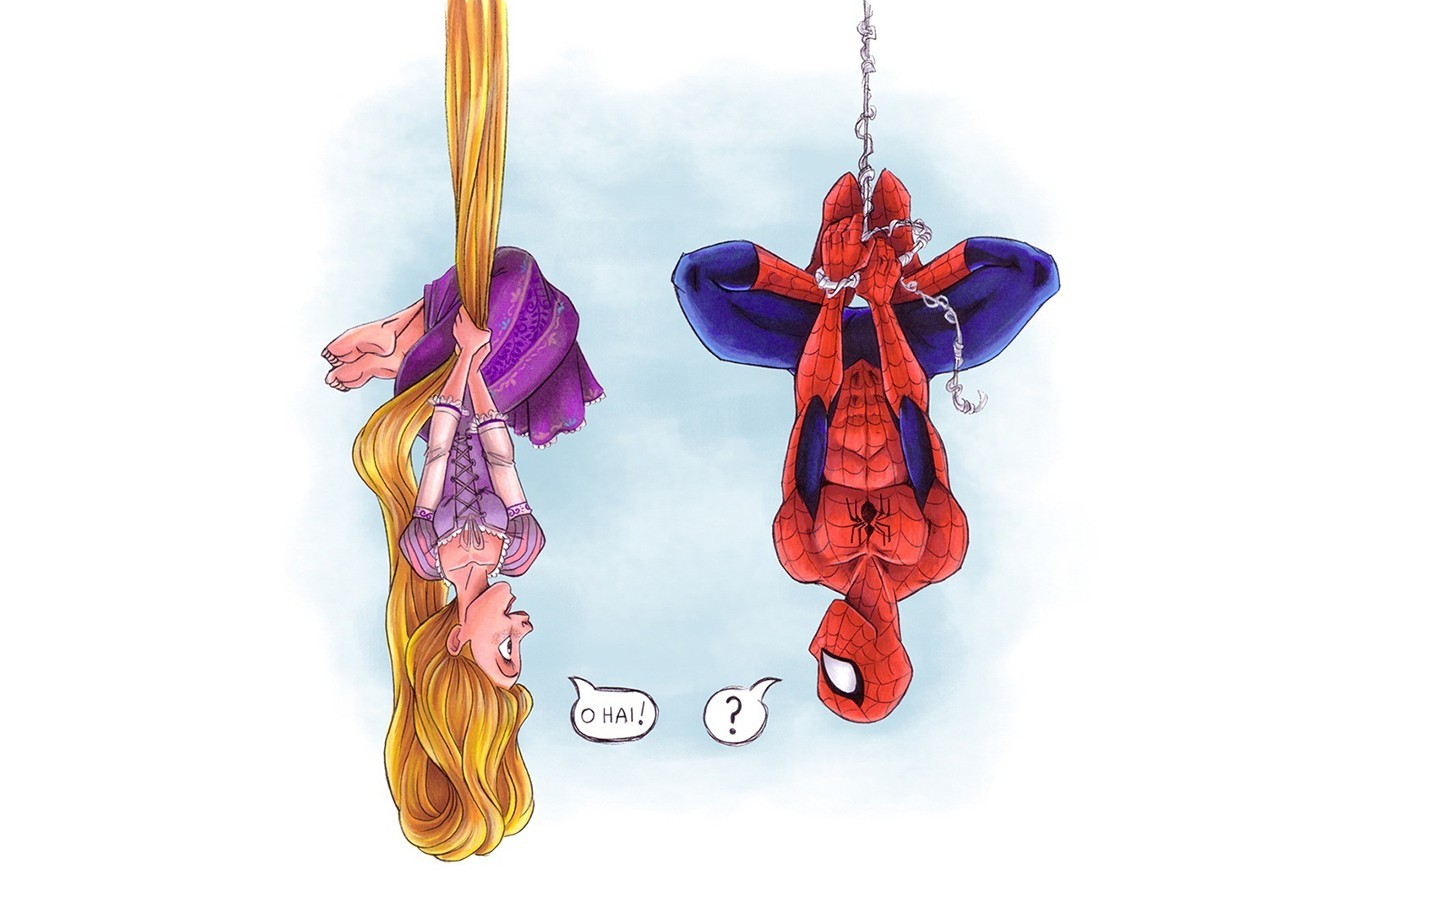 Rapunzel Spider Spider Man Movies Upside Down Long Hair Tangled Crossover Comic Books Disney Humor 1440x900